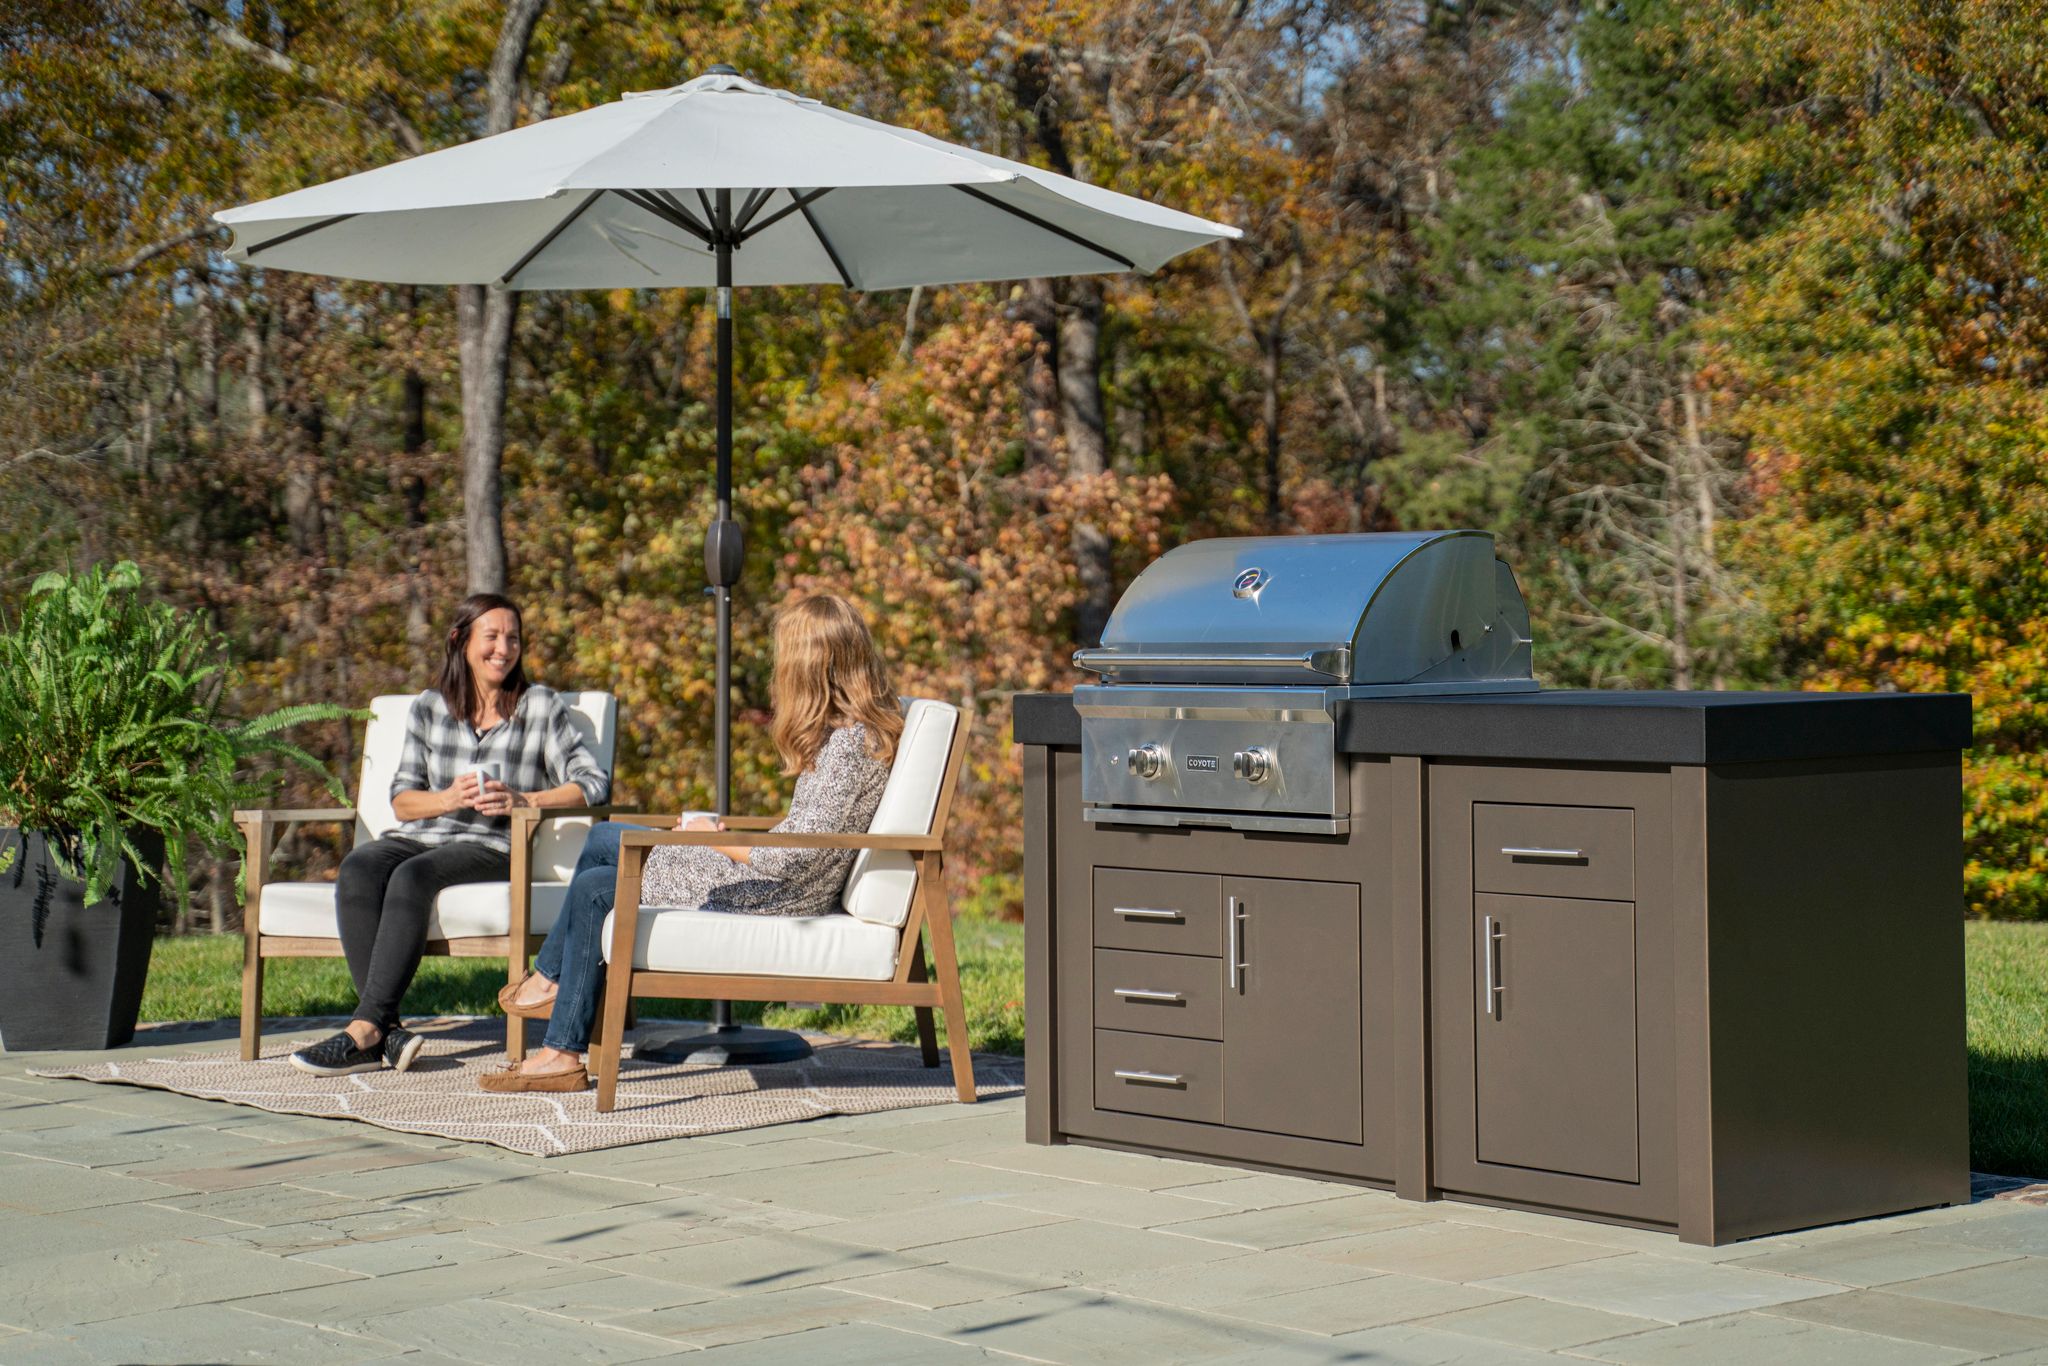 Two women sit by a Stoll Industries outdoor kitchen enjoying outdoor living.